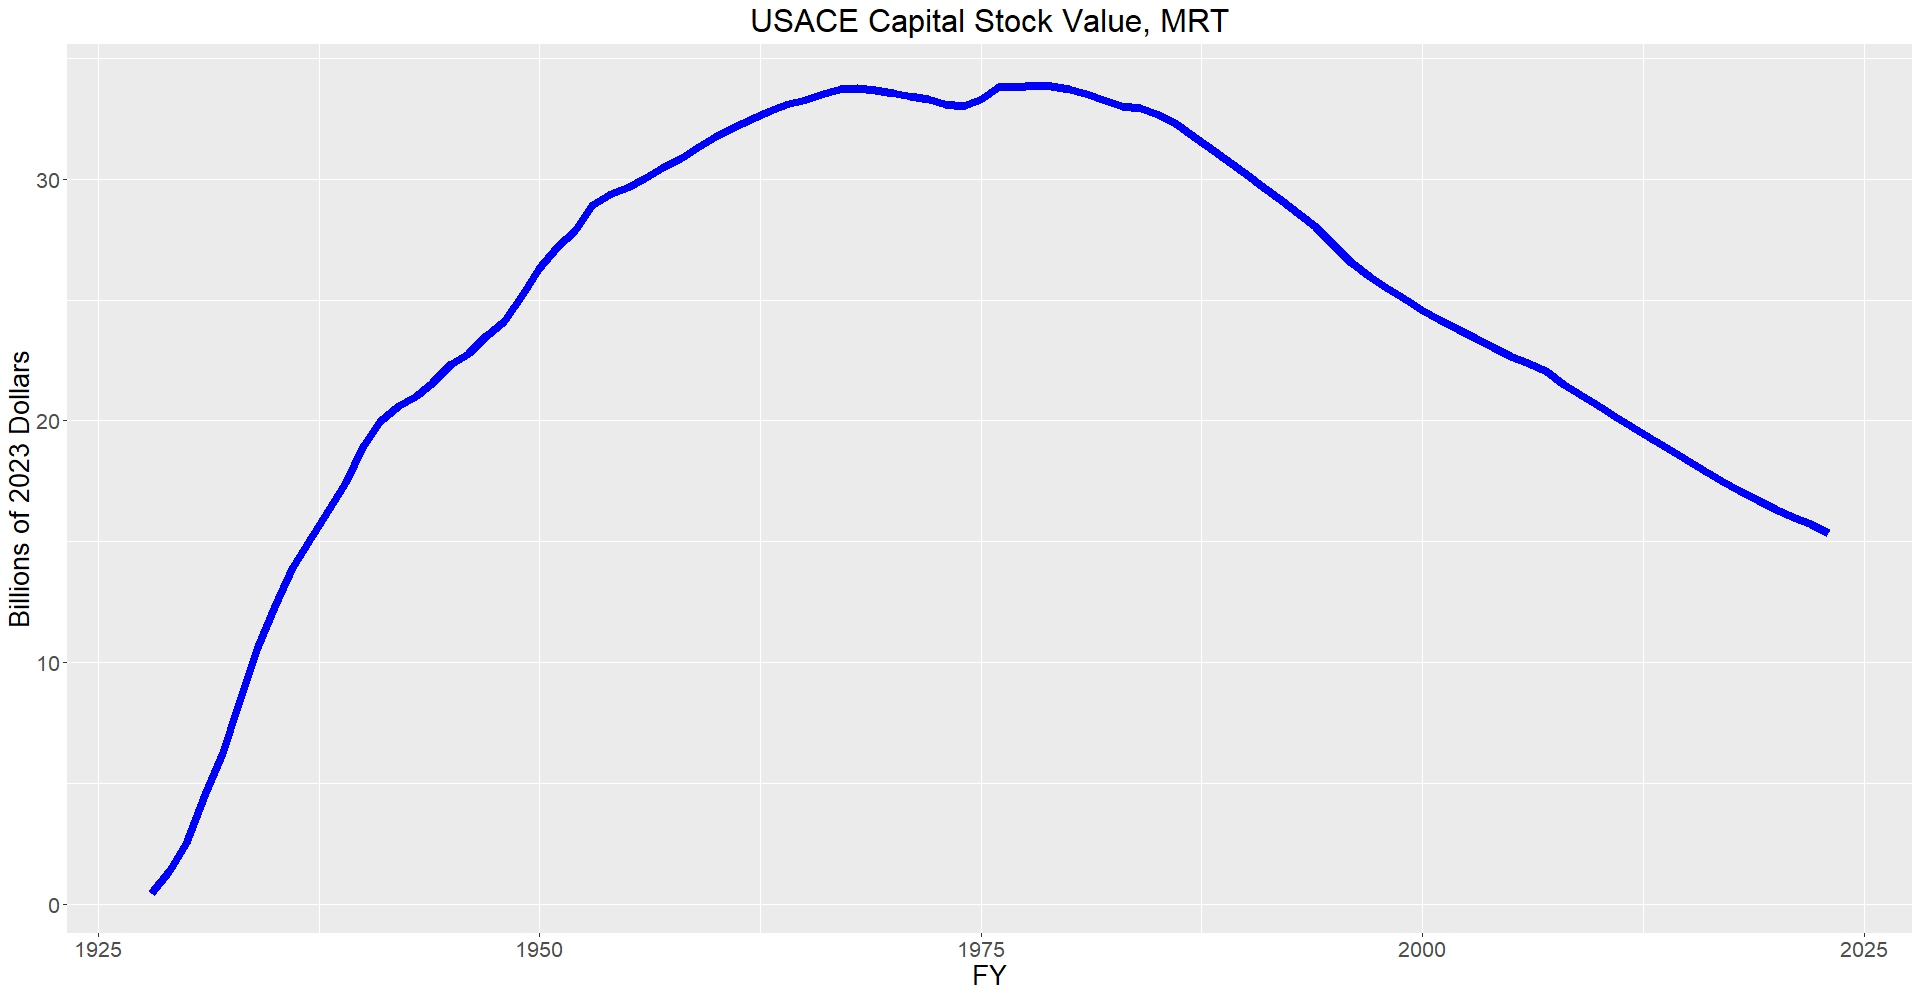 Graphic of USACE Capital Stock Value for Mississippi River & Tributaries